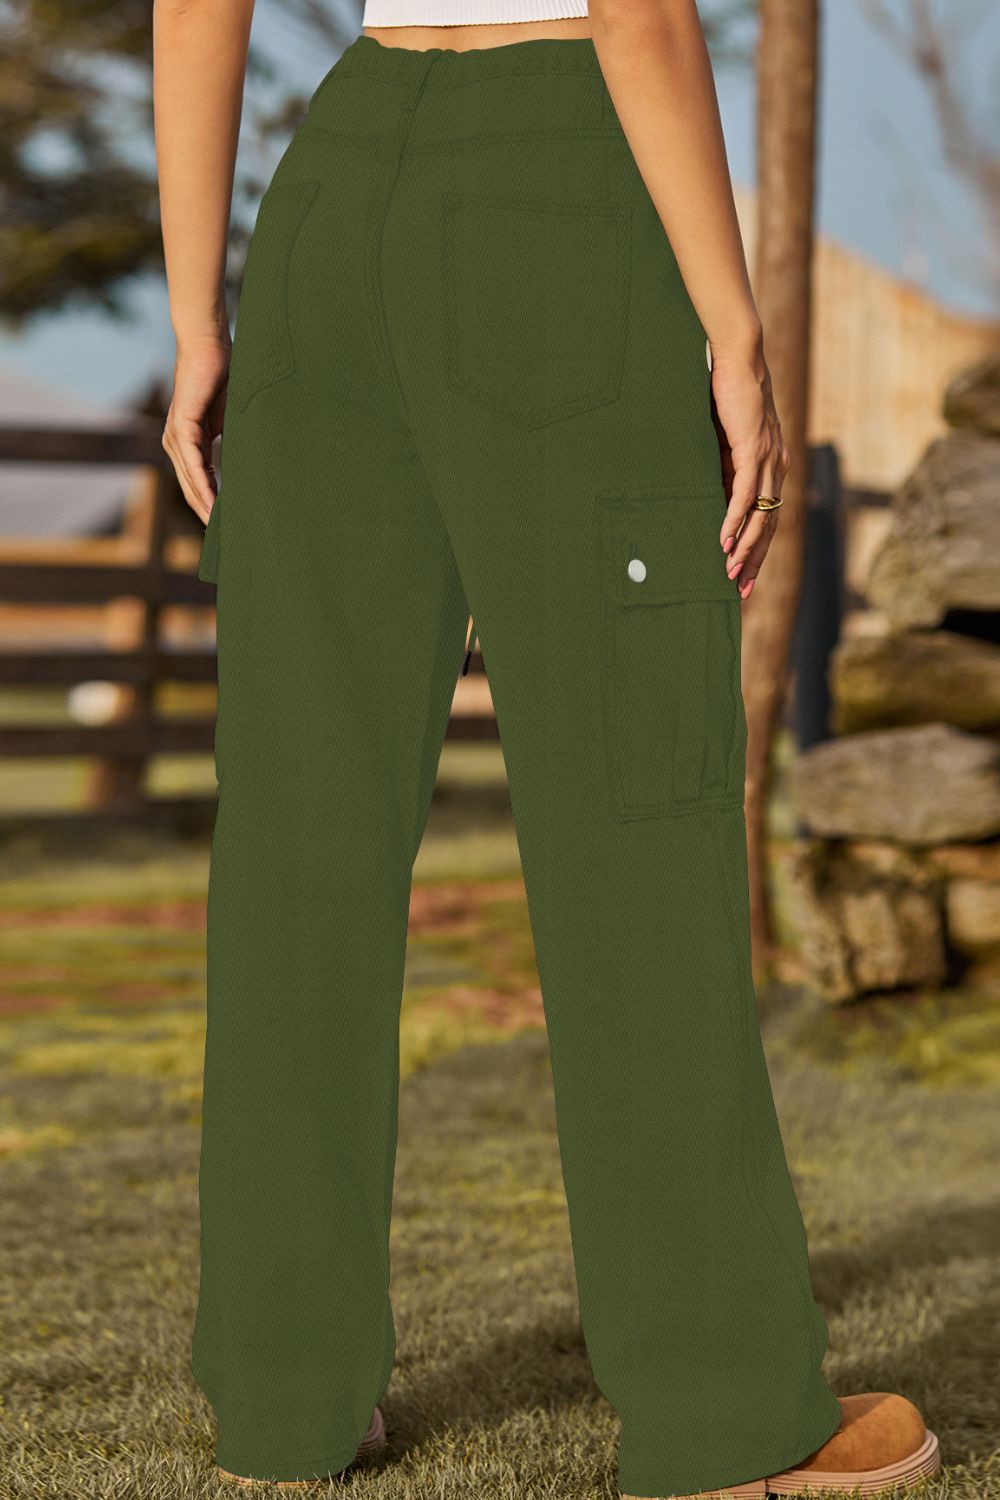 Dark Olive Green Loose Fit Drawstring Jeans with Pocket Sentient Beauty Fashions Apparel &amp; Accessories